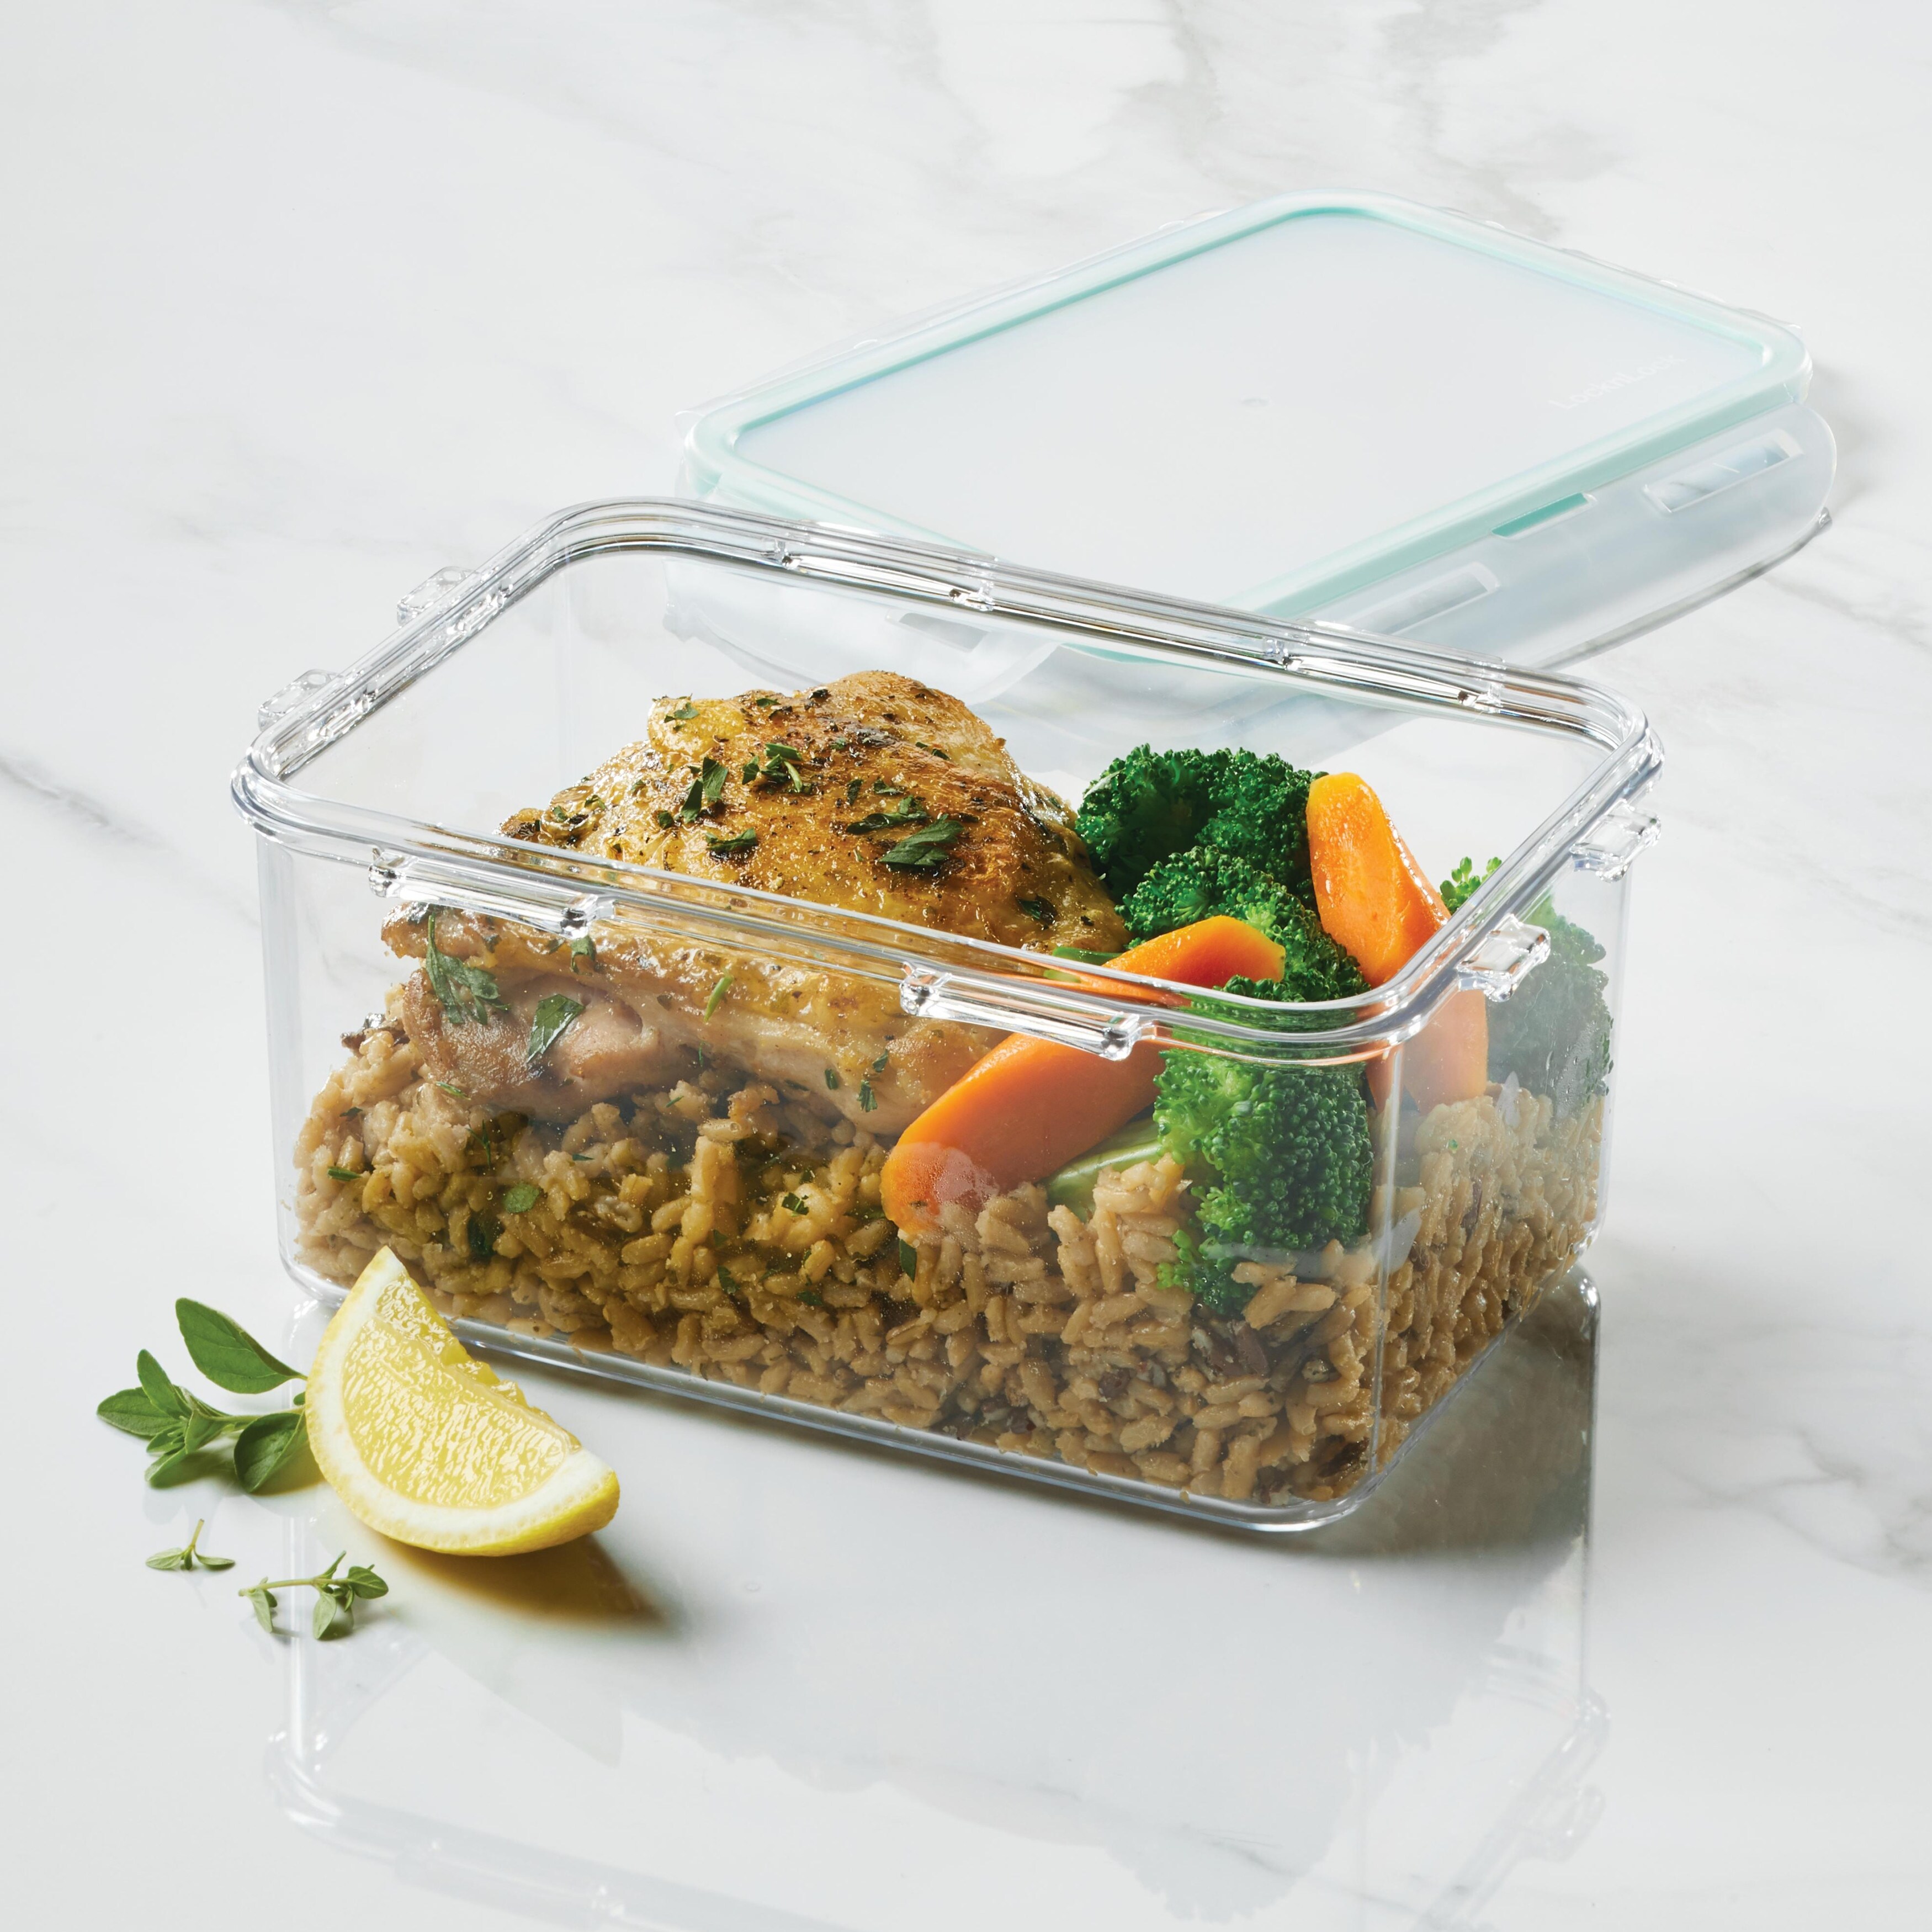 LocknLock Purely Better Vented Glass Food Storage Containers, 21